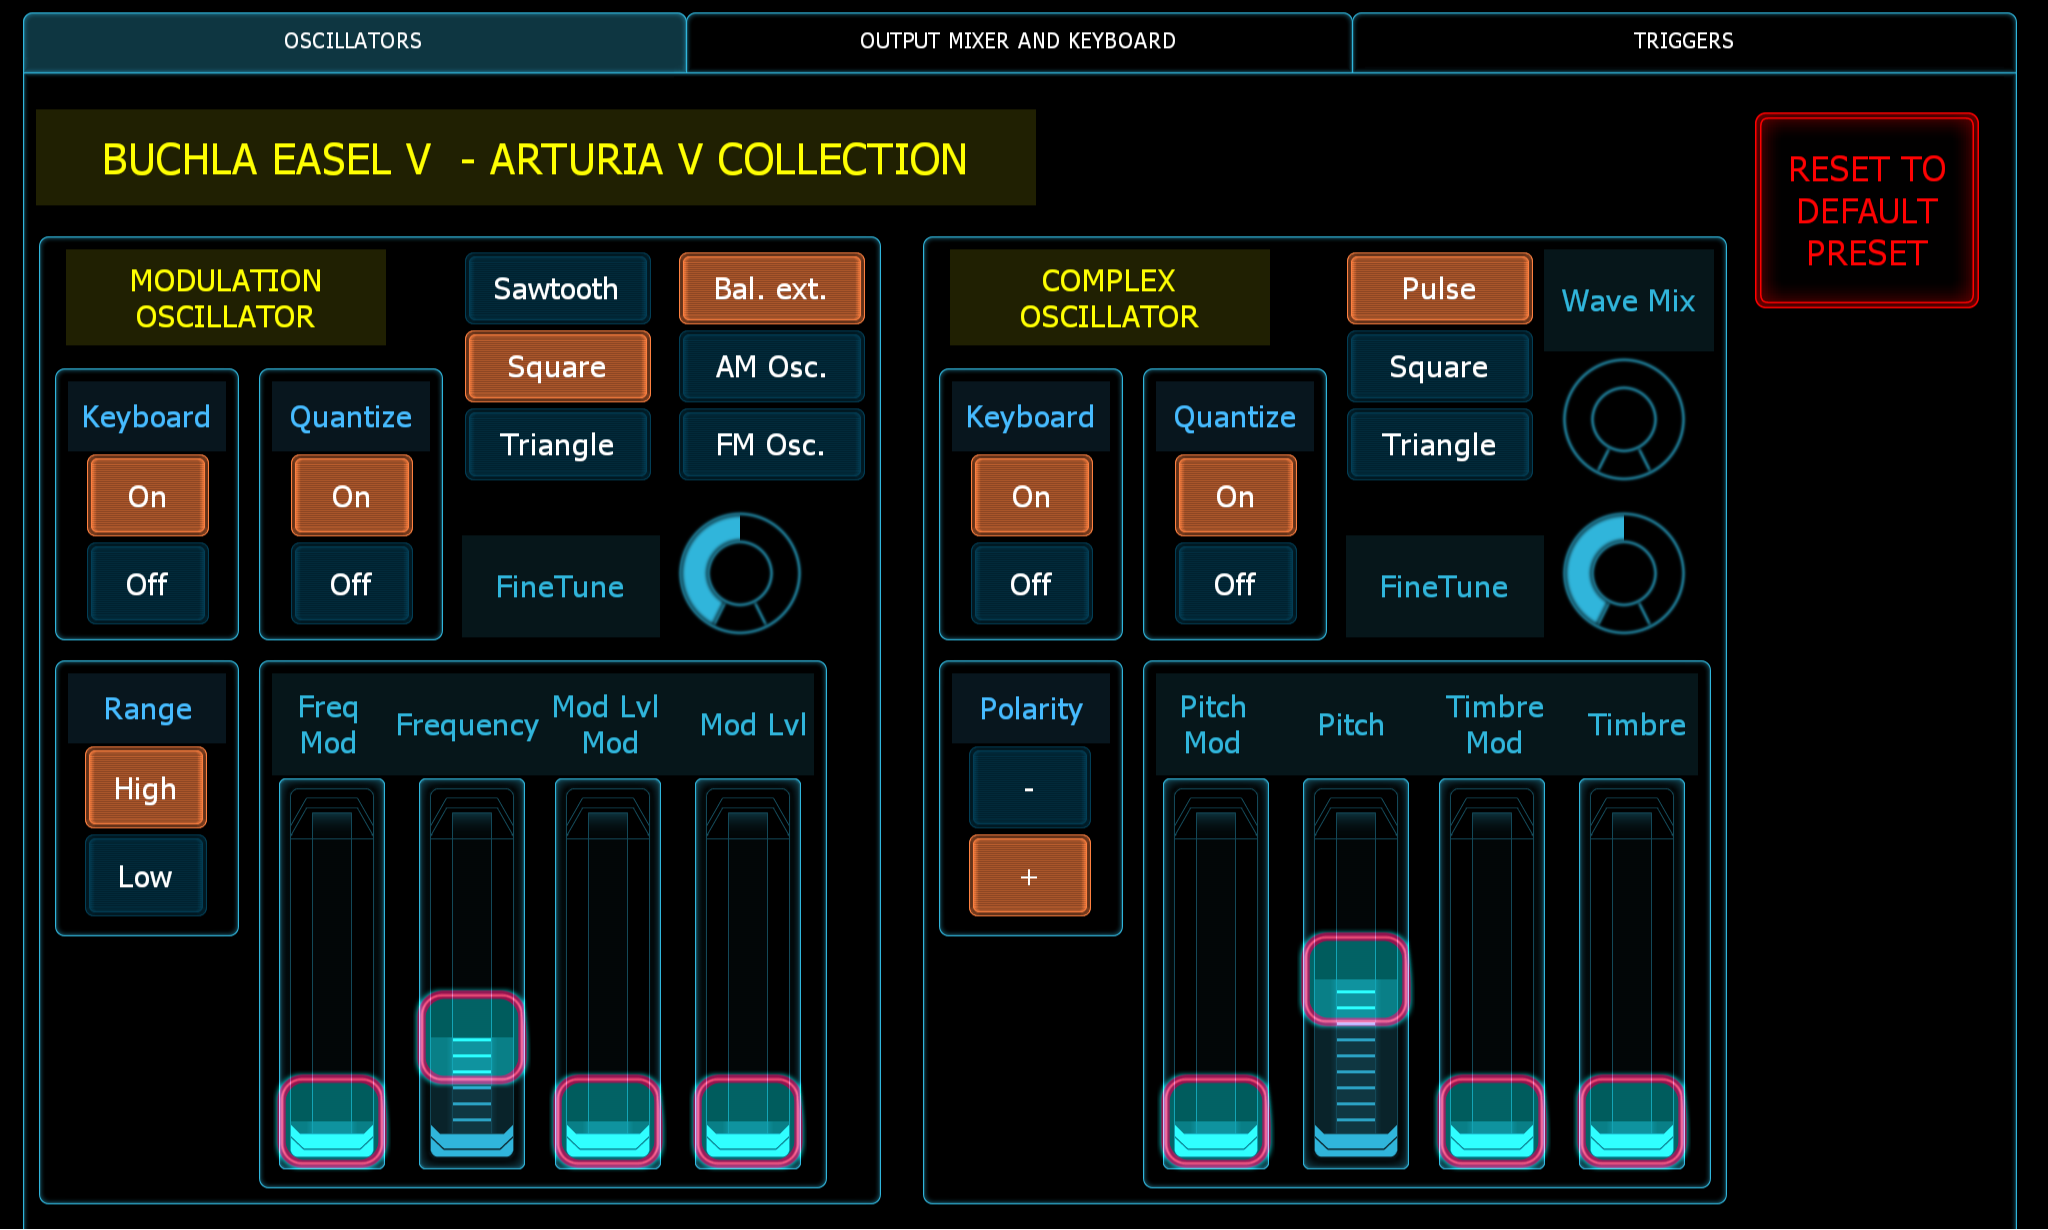 Picture of the Lemur Midi Controller GUI for the Arturia Buchla Easel V virtual instrument